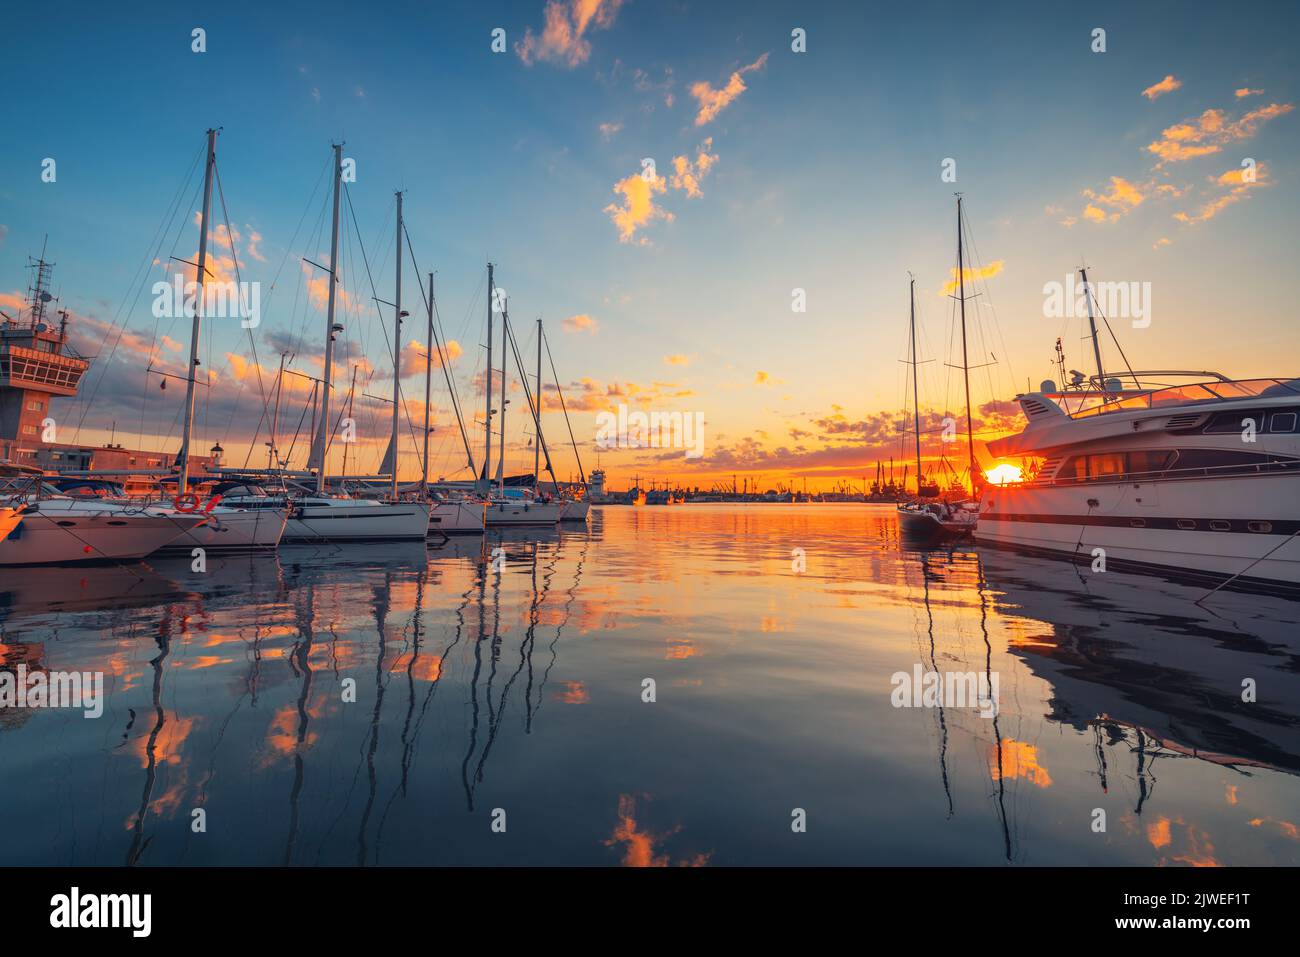 Yacht and sailboat harbor and scenic sunset over the sea. Yachts and boats on the coast. Stock Photo